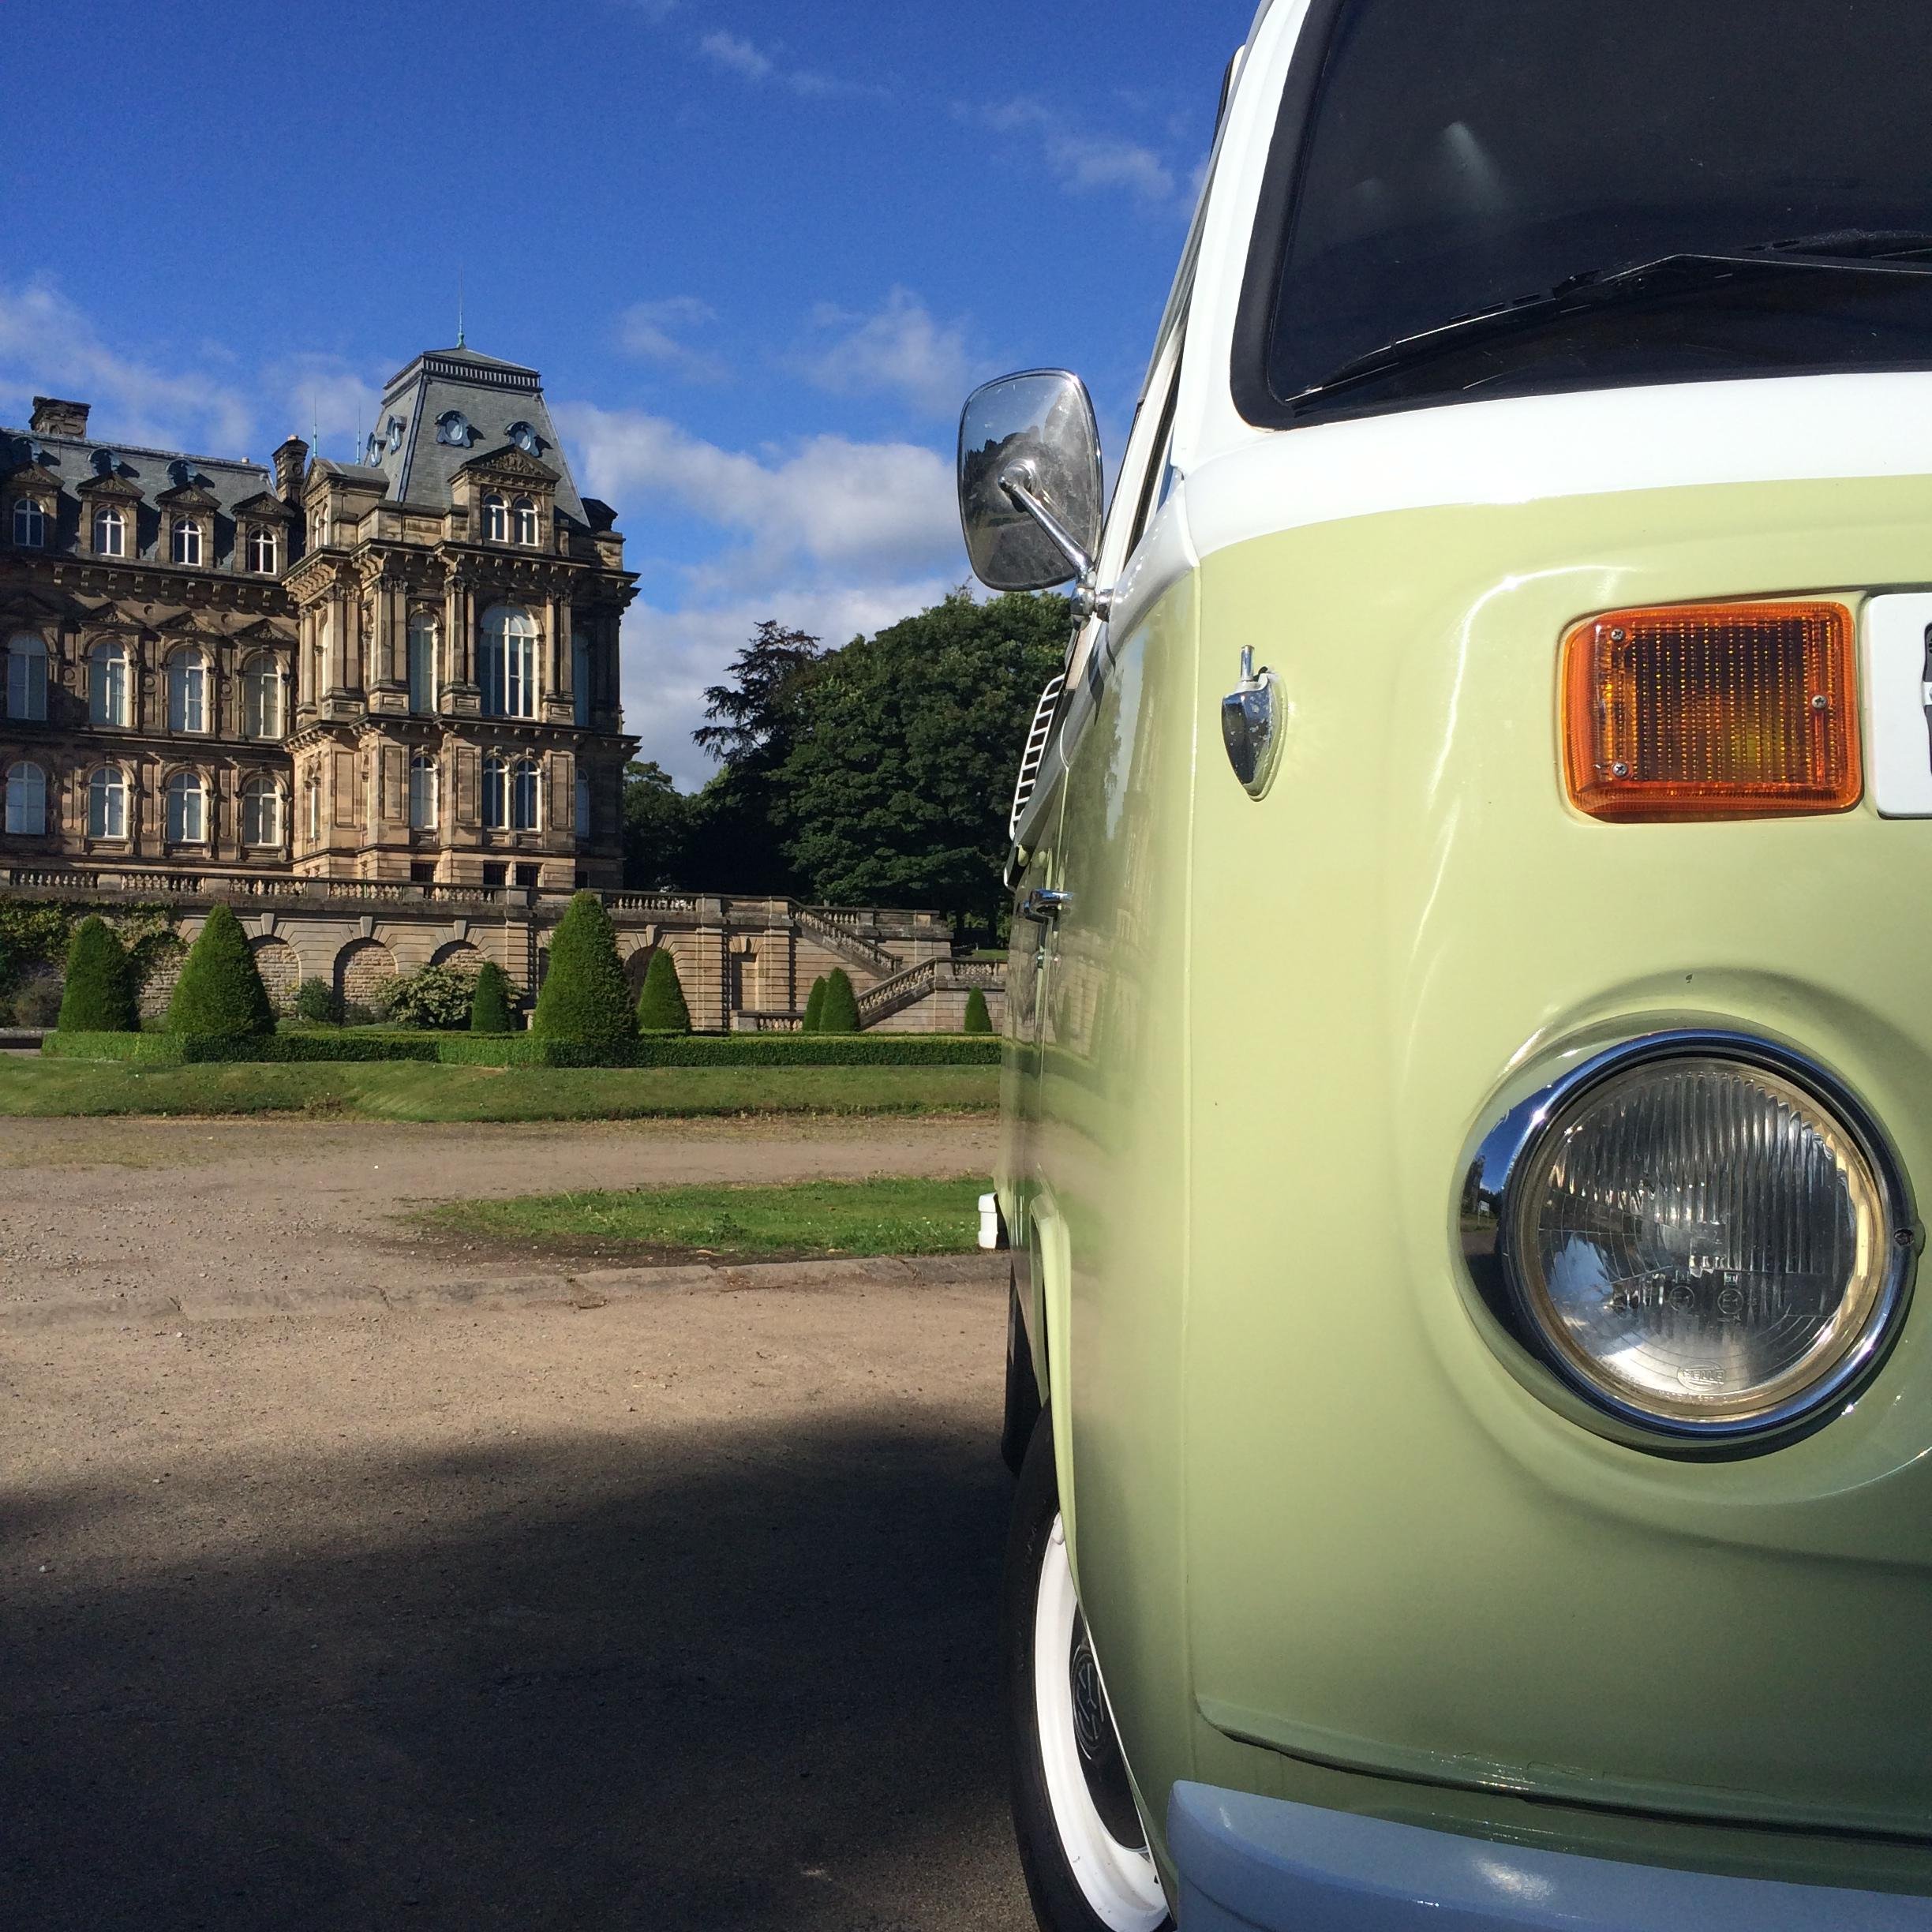 Classic VW Campervan Hire and Campervan Retro Sweet Shop. Vw Self Drive and Chauffeur driven available